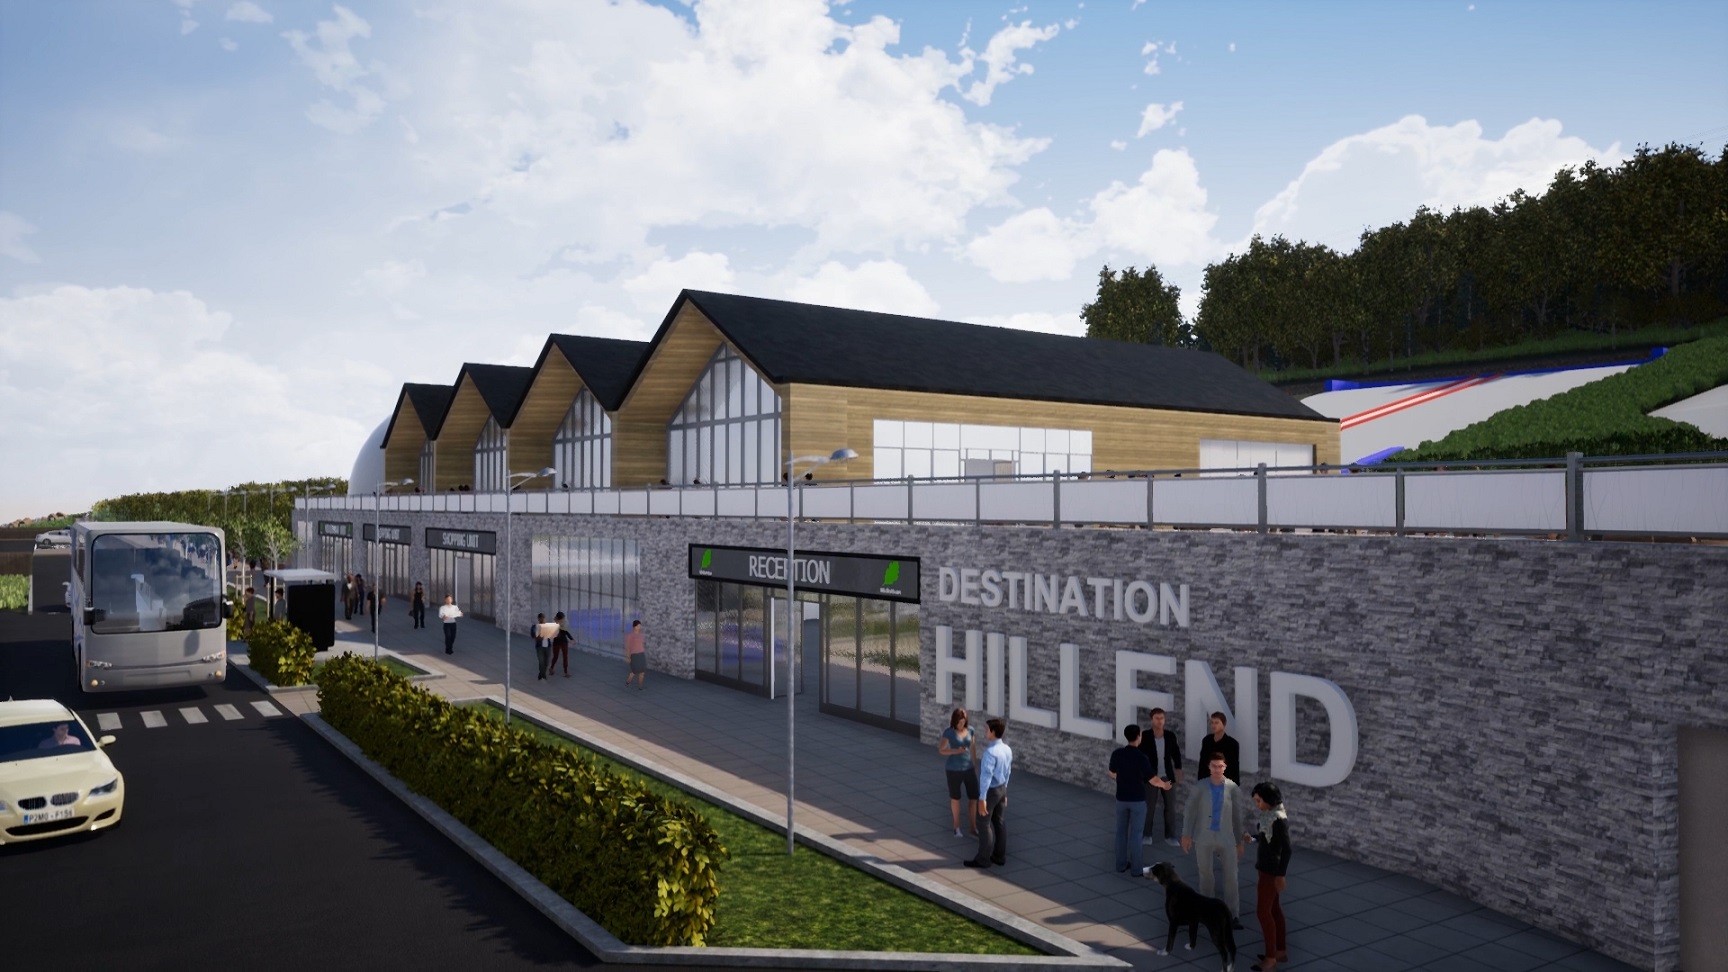 Funding injection for Midlothian Snowsports Centre expansion